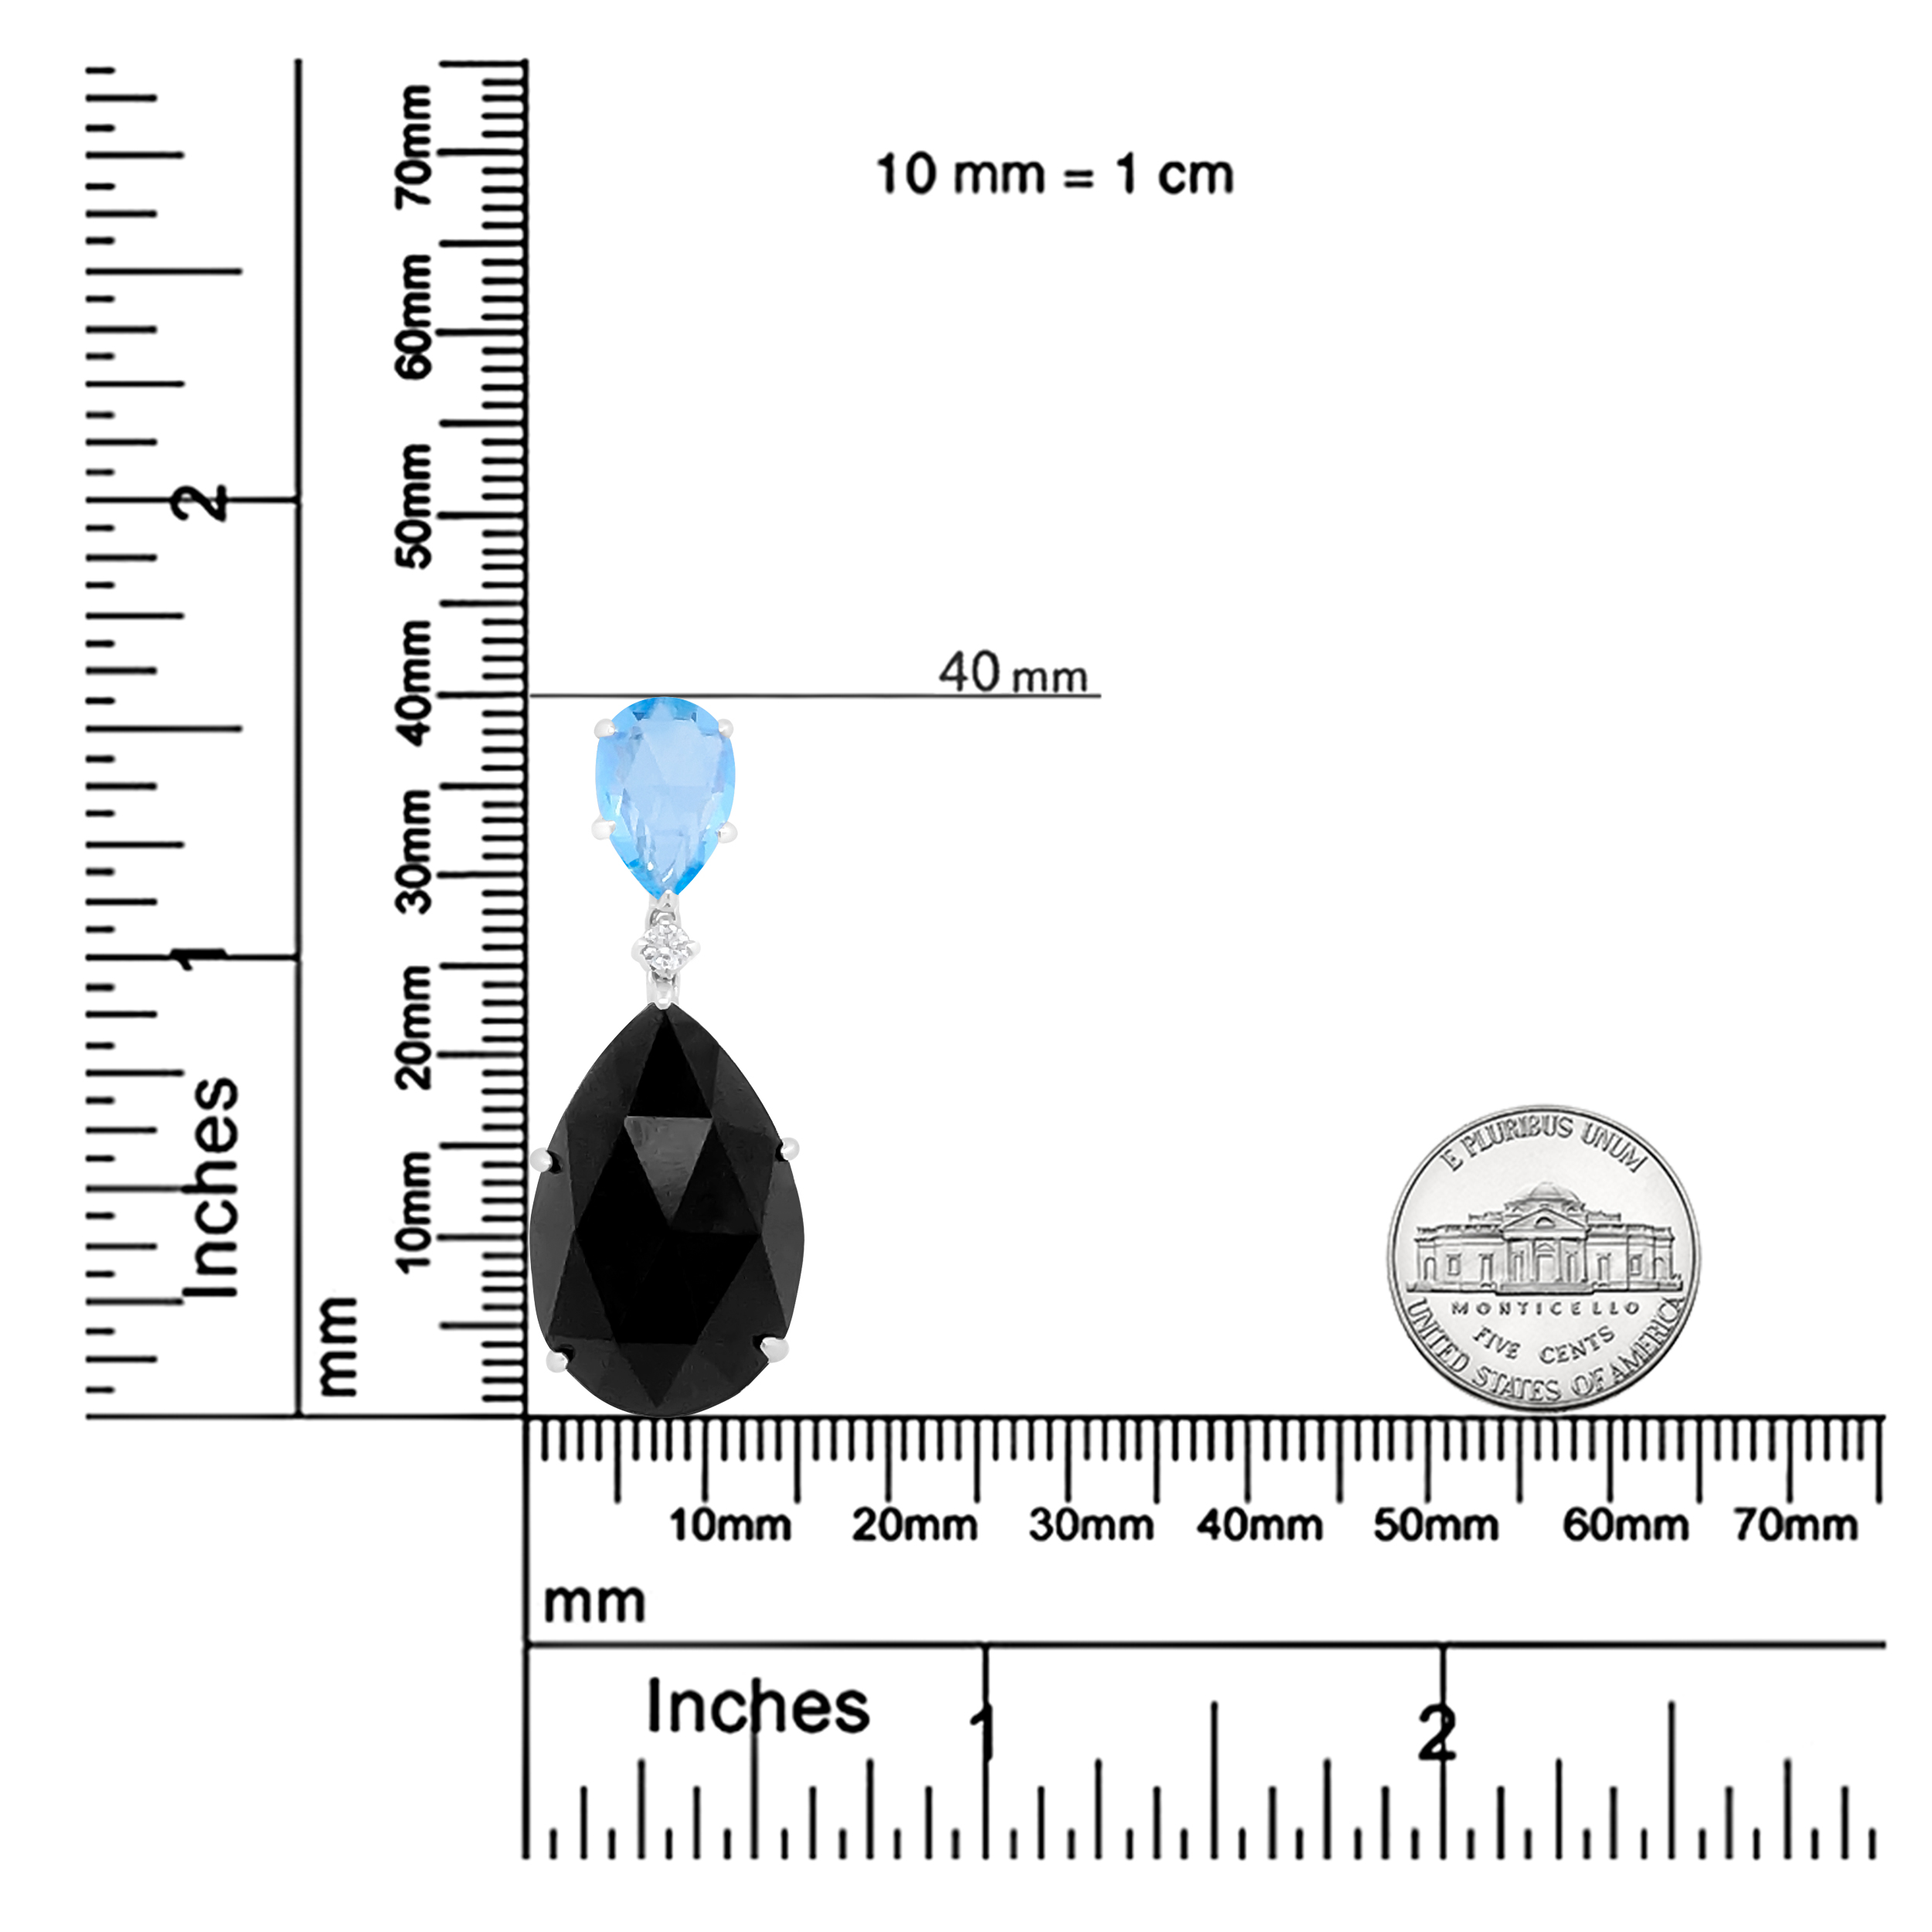 Haus of Brilliance 18K White Gold Diamond Accent and Pear Cut Sky Blue Topaz and Pear Cut Black Onyx Dangle Drop 18" Pendant Necklace